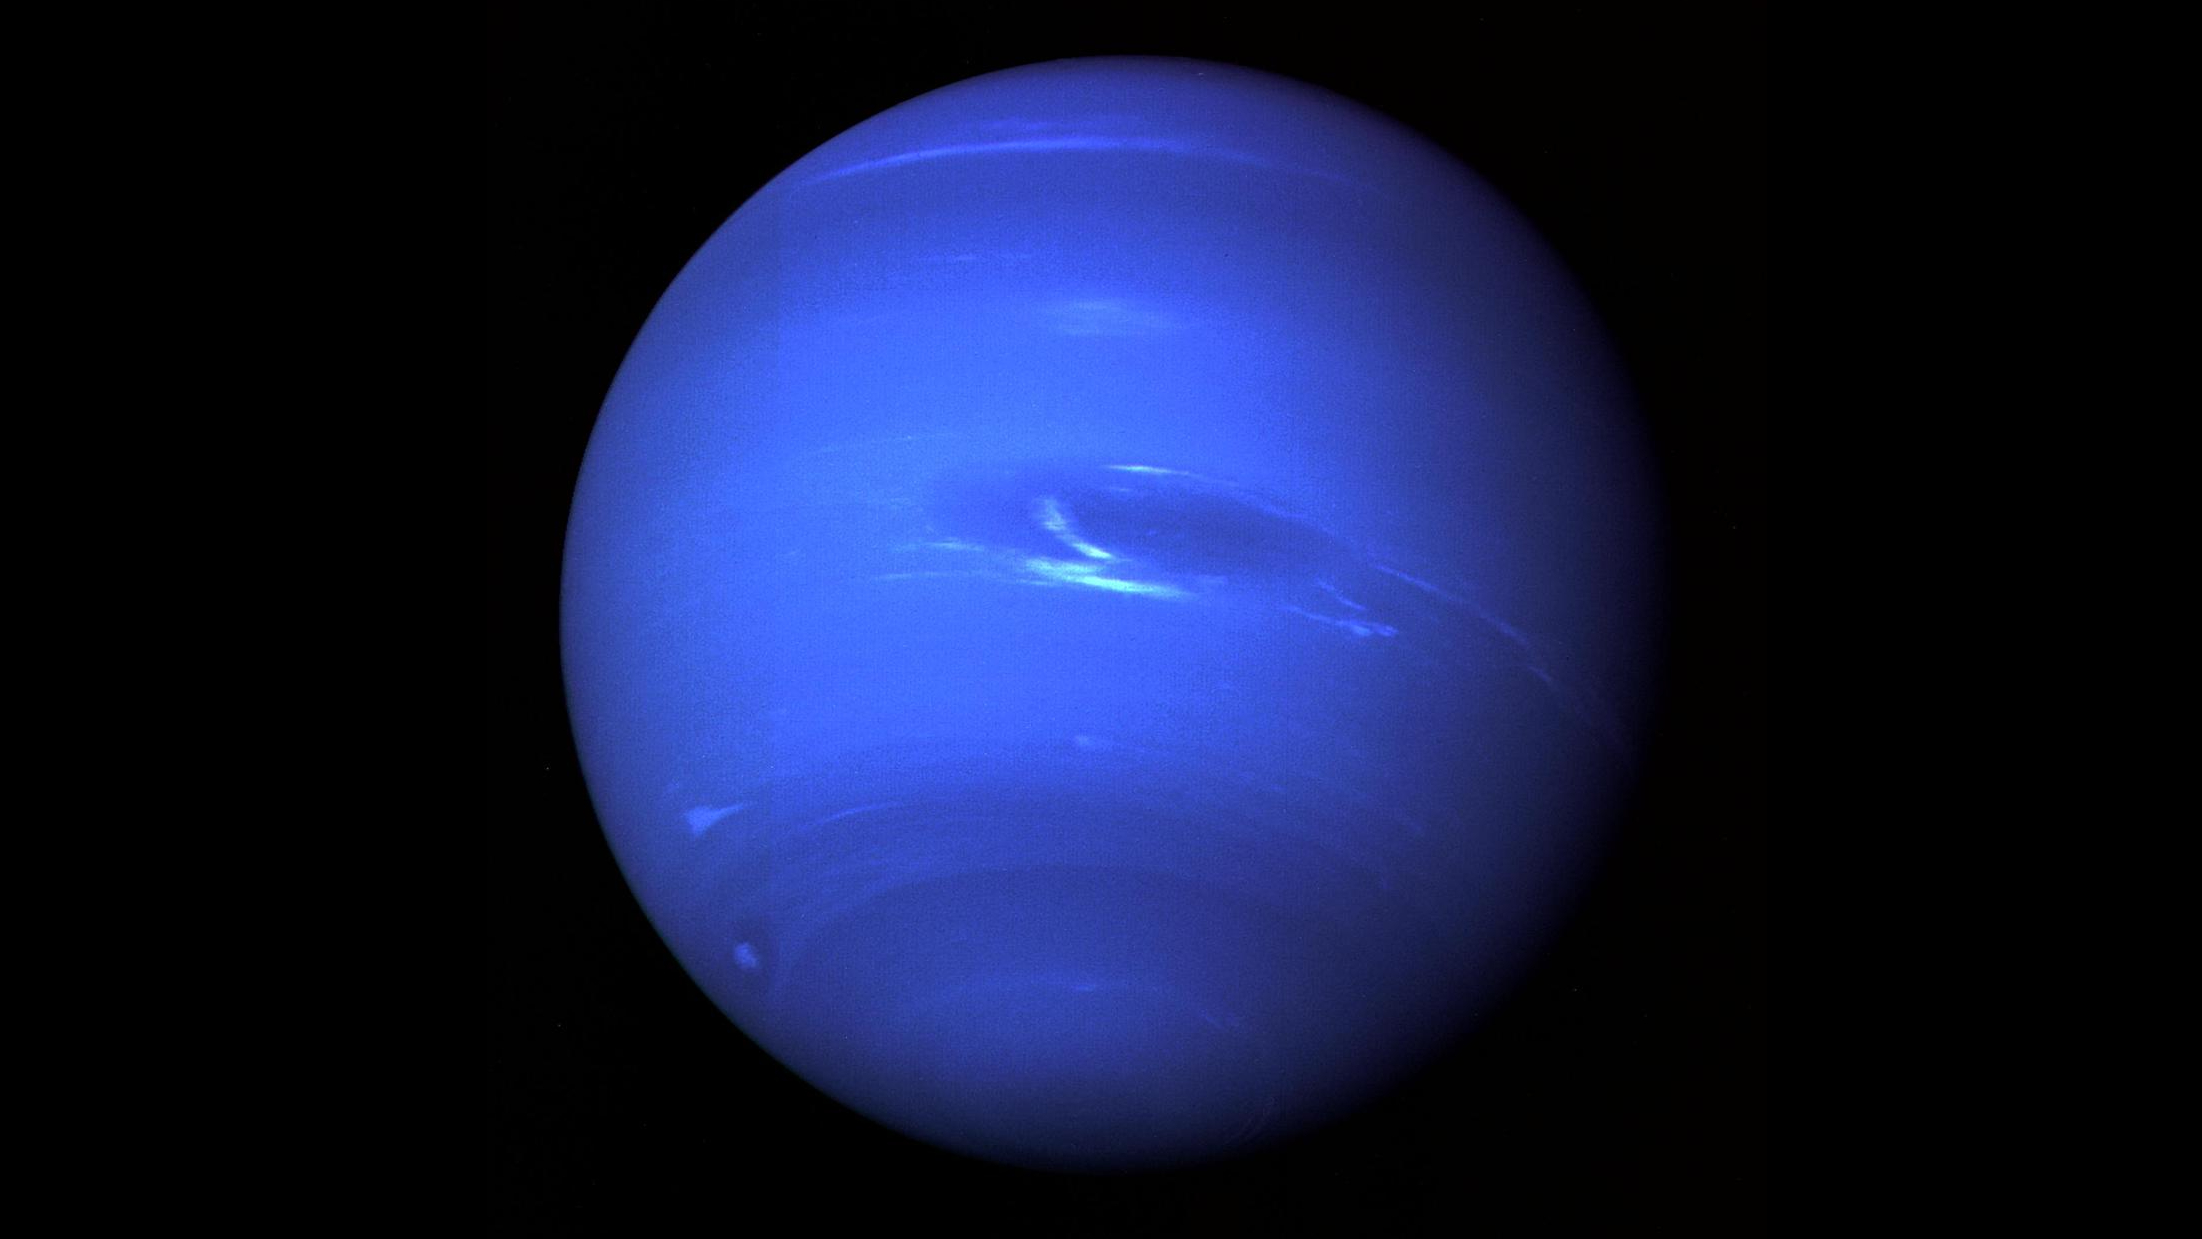 Neptune is approximately 30 times as far from the sun as Earth.